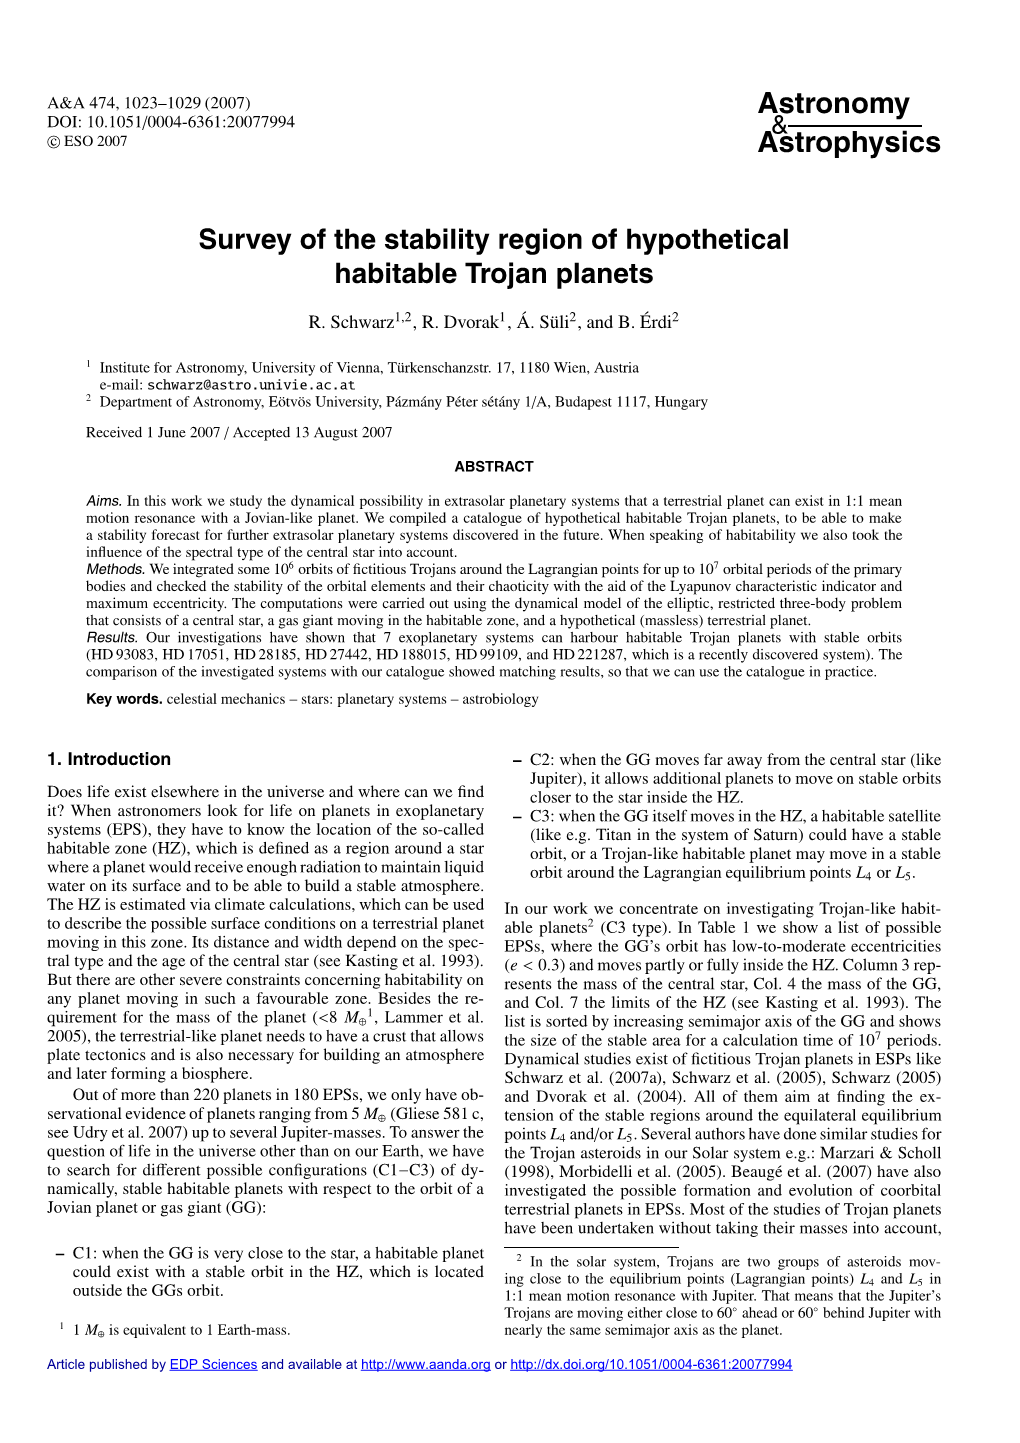 Survey of the Stability Region of Hypothetical Habitable Trojan Planets